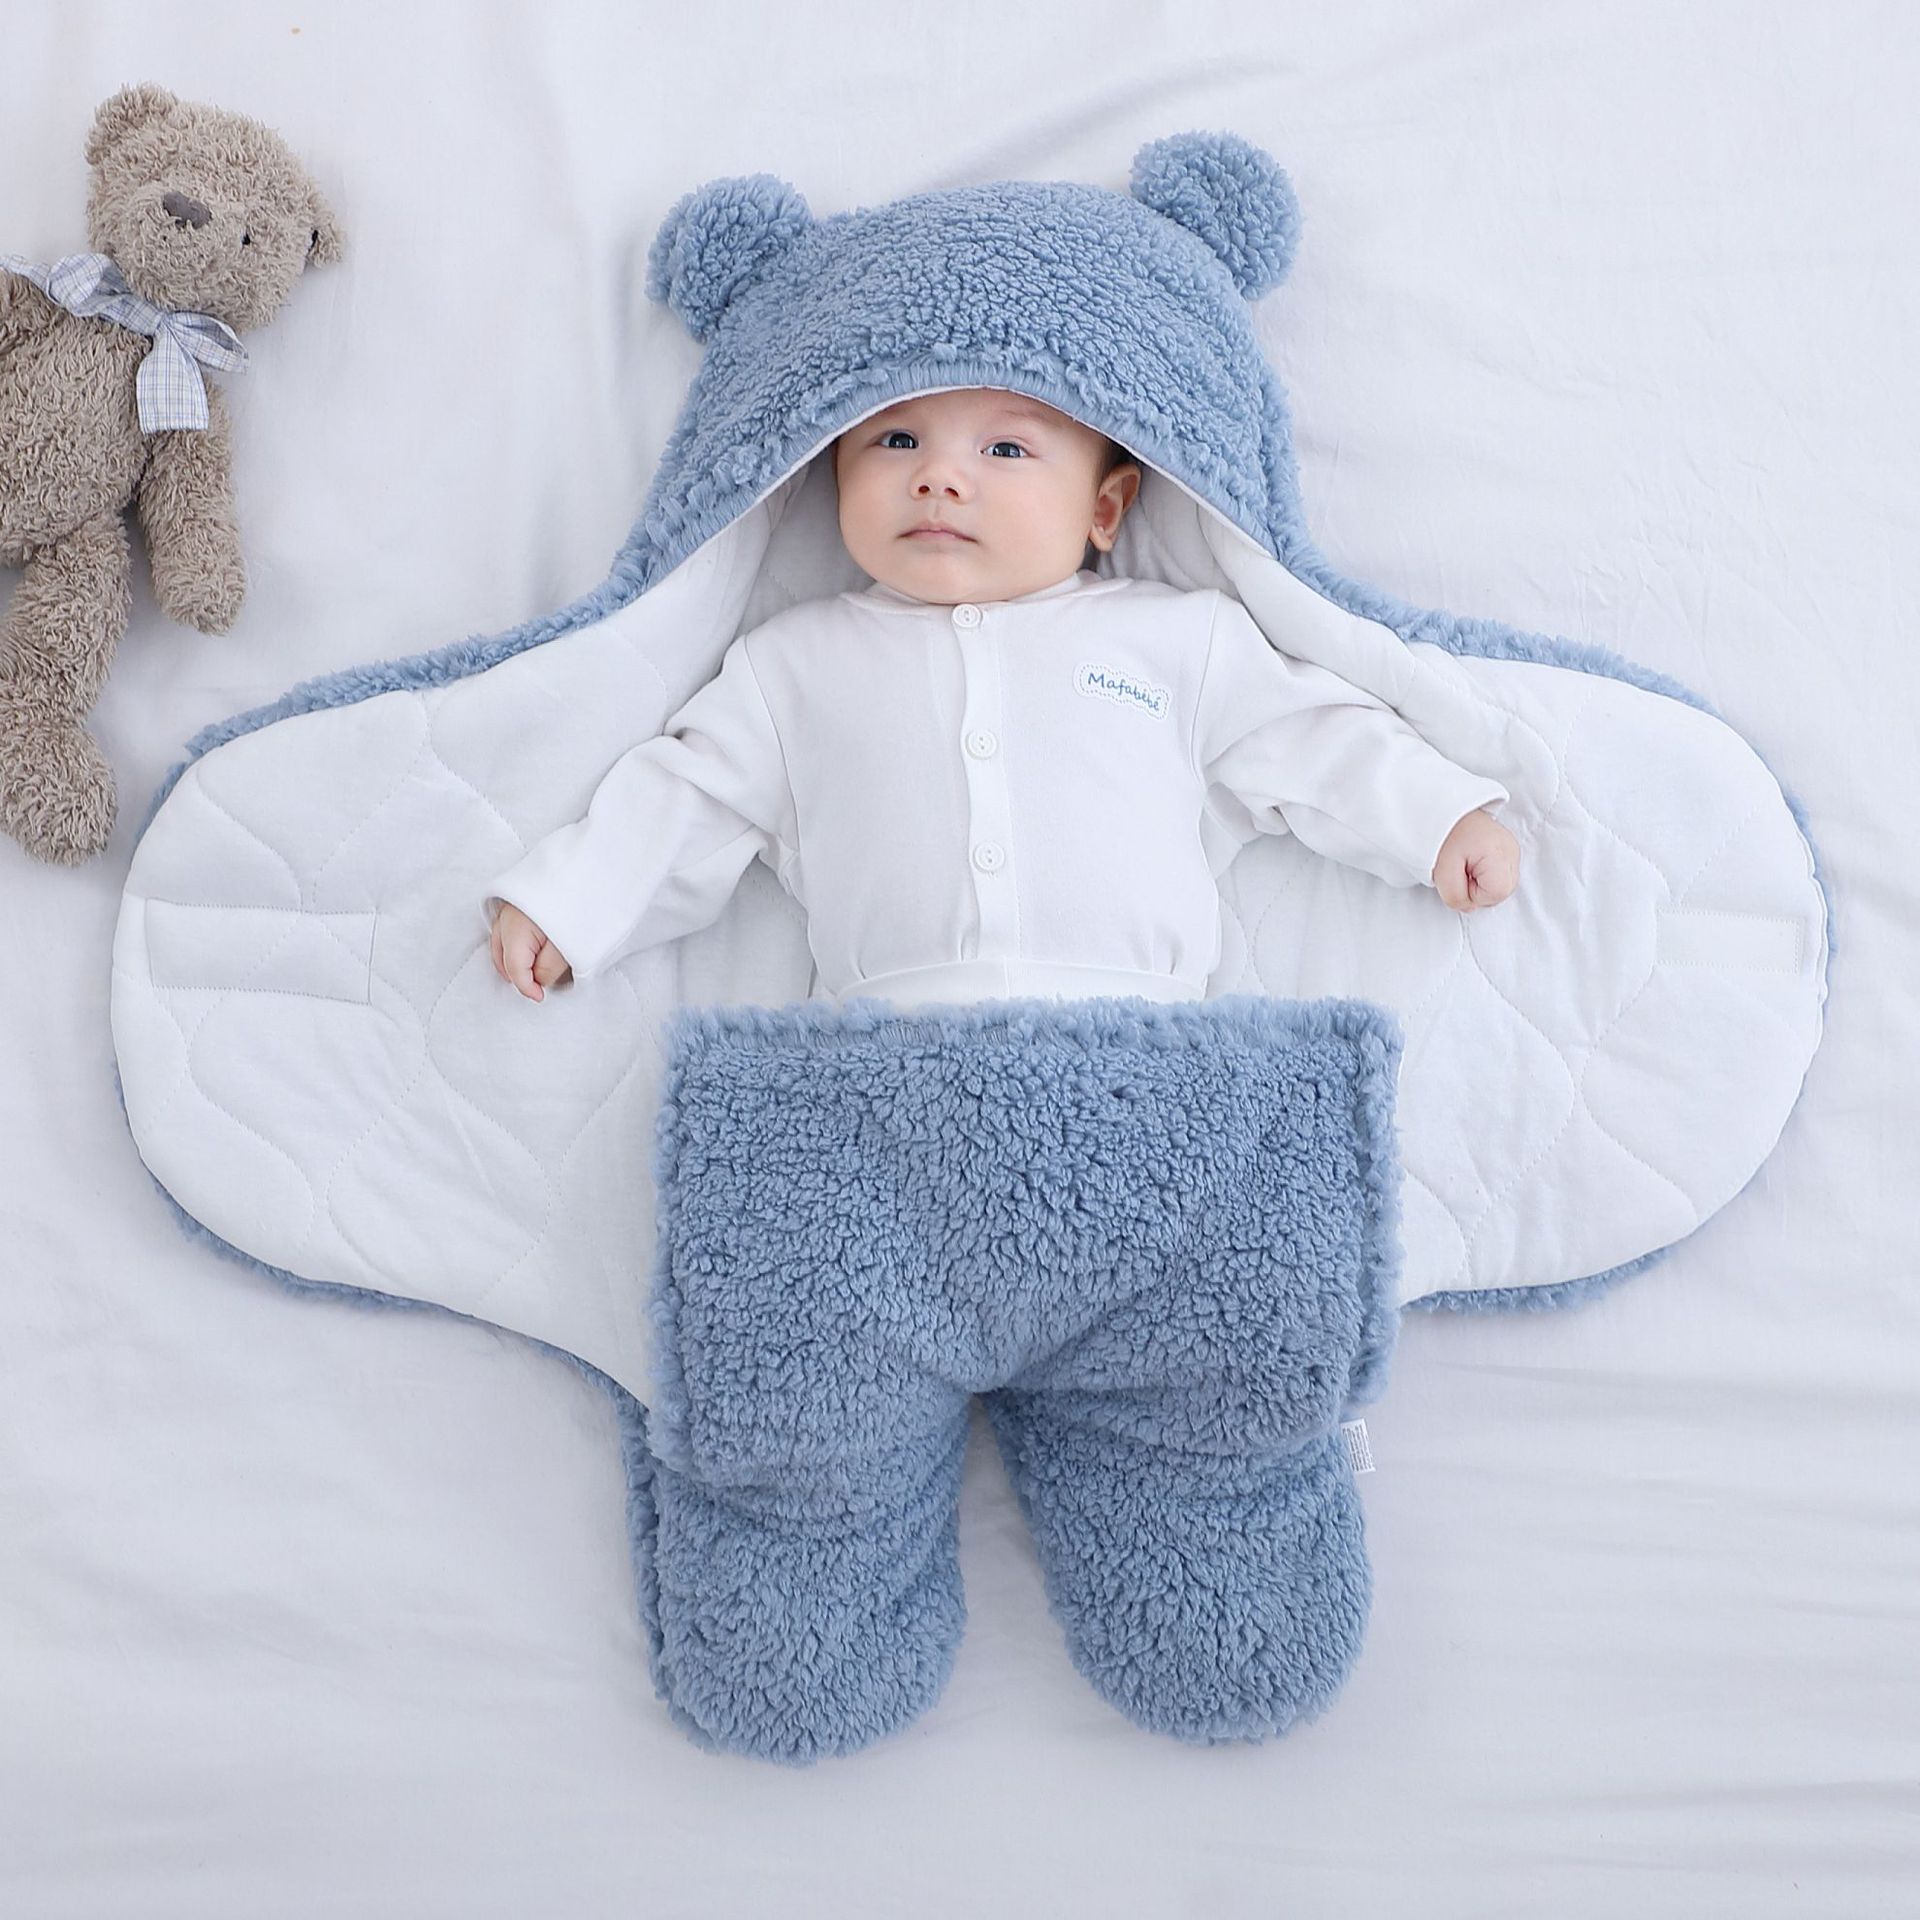 👶Cute Animal Style Baby Shearling Swaddling Clothes(0-6 months) 